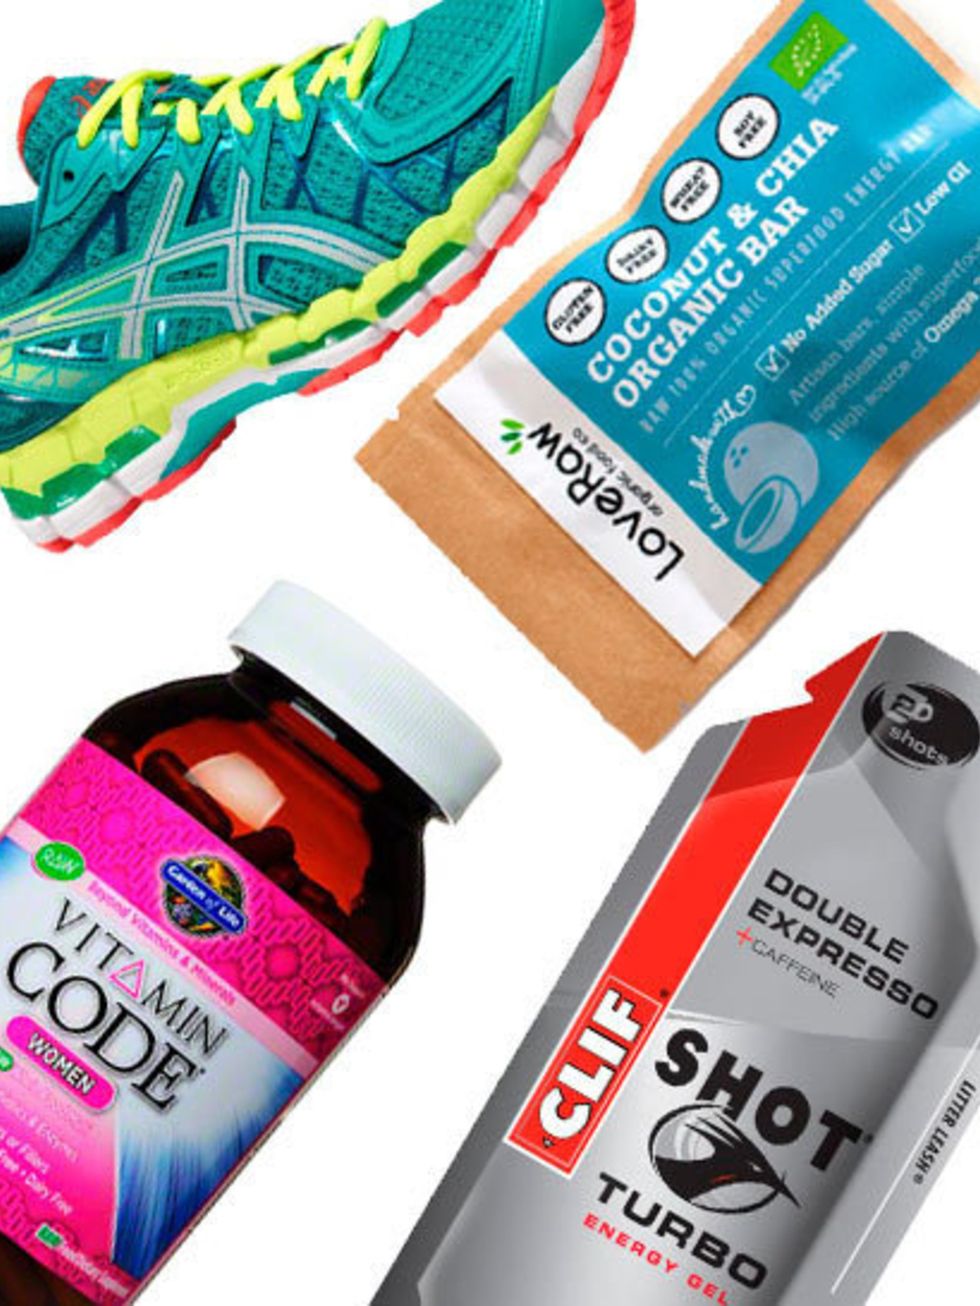 <h4>Seen <a href="http://www.elleuk.com/magazine">Fit notes in ELLE magazine</a>? Heres your weekly fix of all things health and fitness. </h4><p>This week  bright trainers, raw food vitamins and the energy shots that keep us going.</p><p><em>Click thro